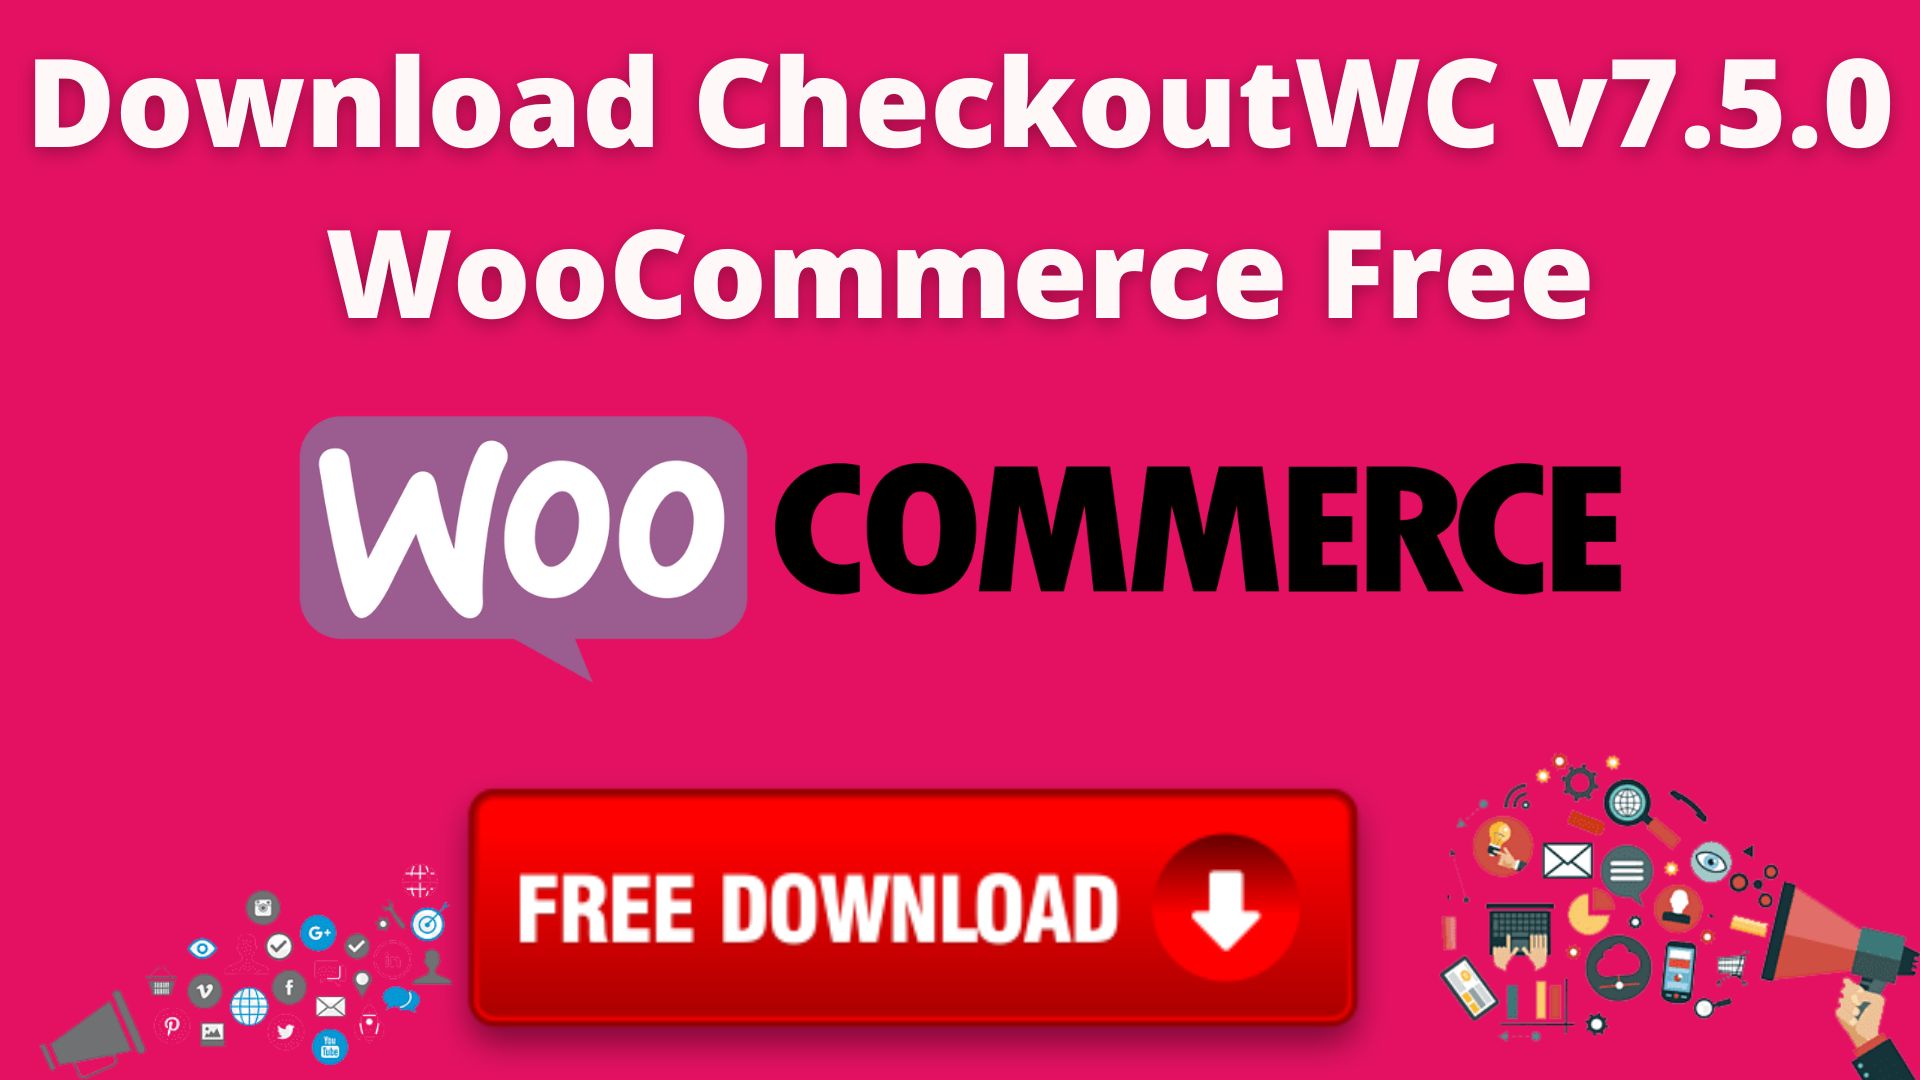 Download Checkoutwc V7.5.0 Woocommerce Free